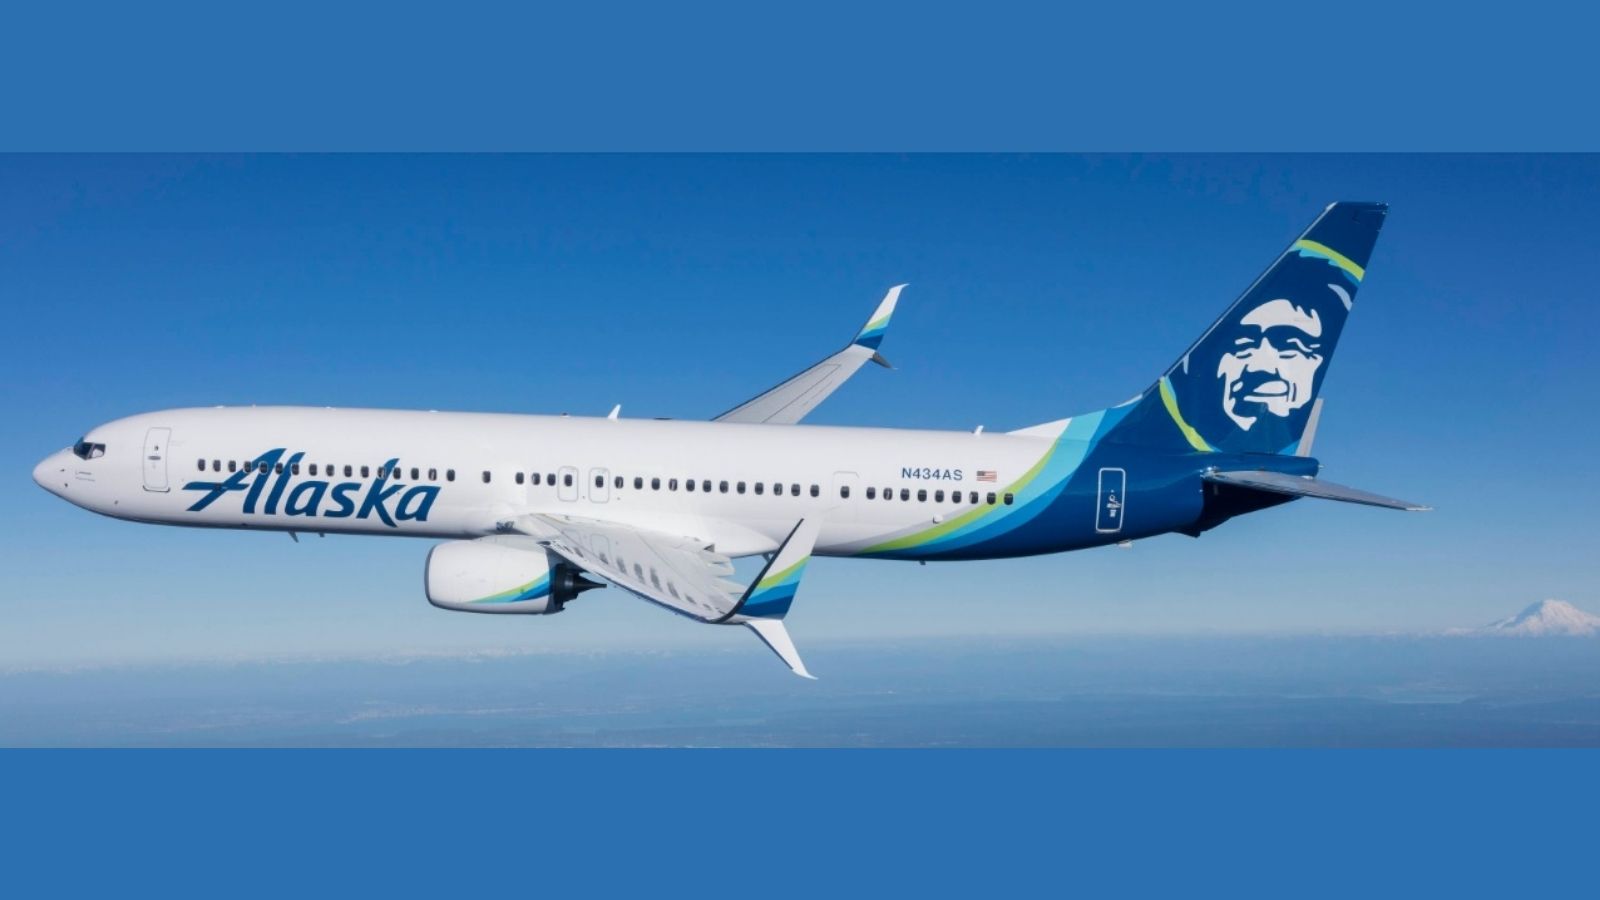 Alaska Airlines is now charging an $8 flat rate for faster satellite wifi